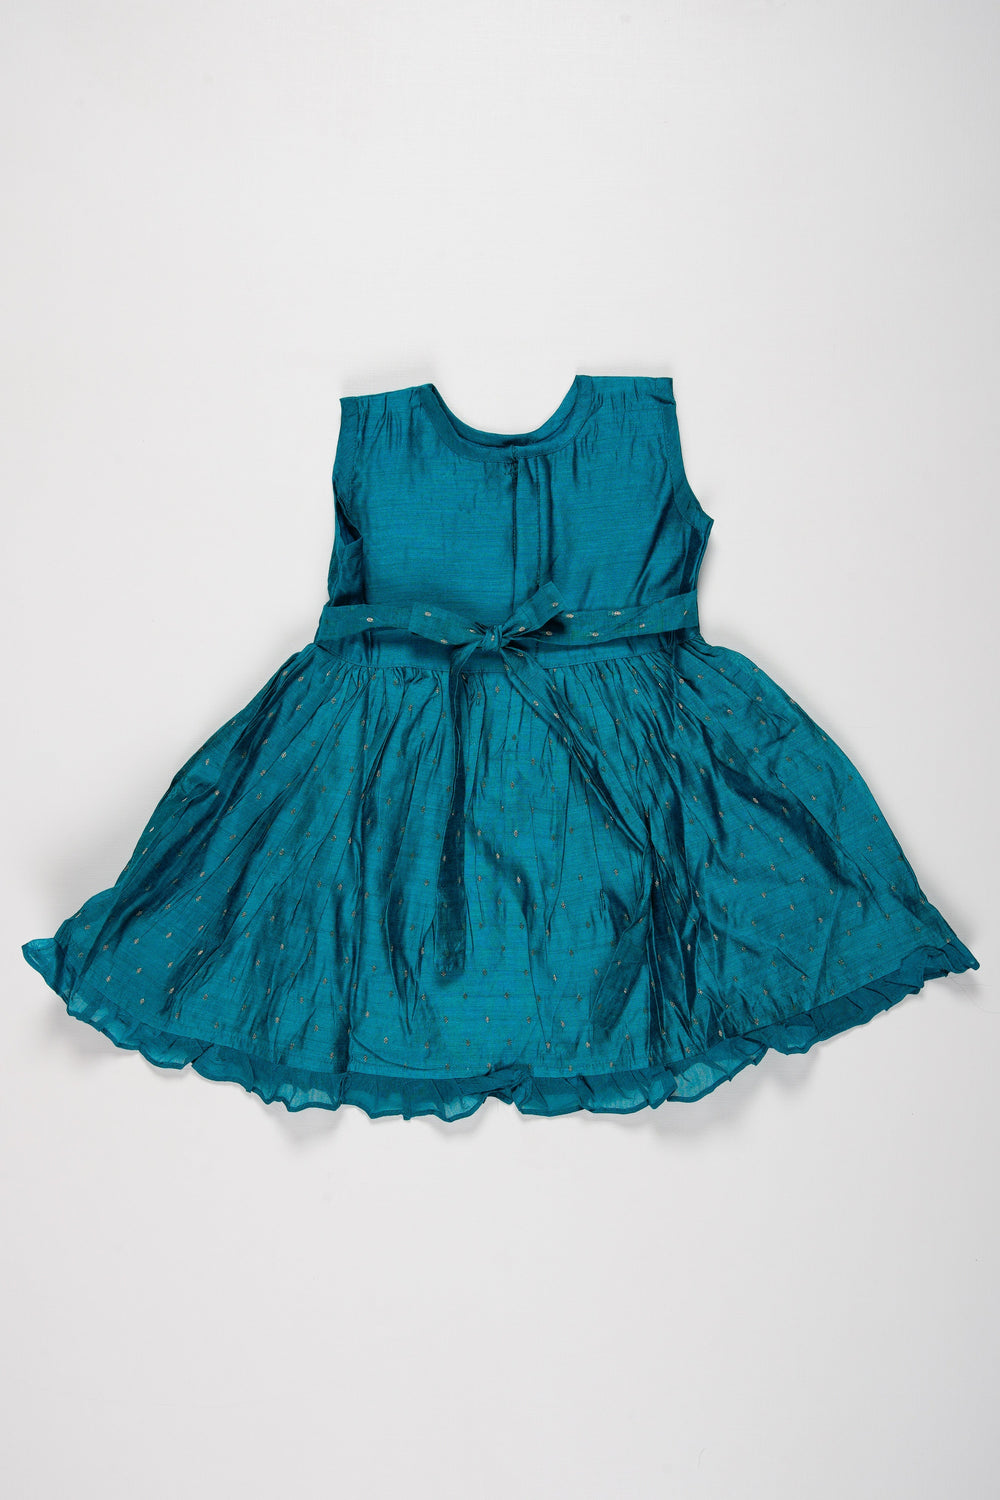 The Nesavu Girls Cotton Frock Teal Chanderi Cotton Frock with Embroidered Fawn for Young Girls Nesavu Shop Teal Chanderi Cotton Frock with Fawn Embroidery for Girls | The Nesavu